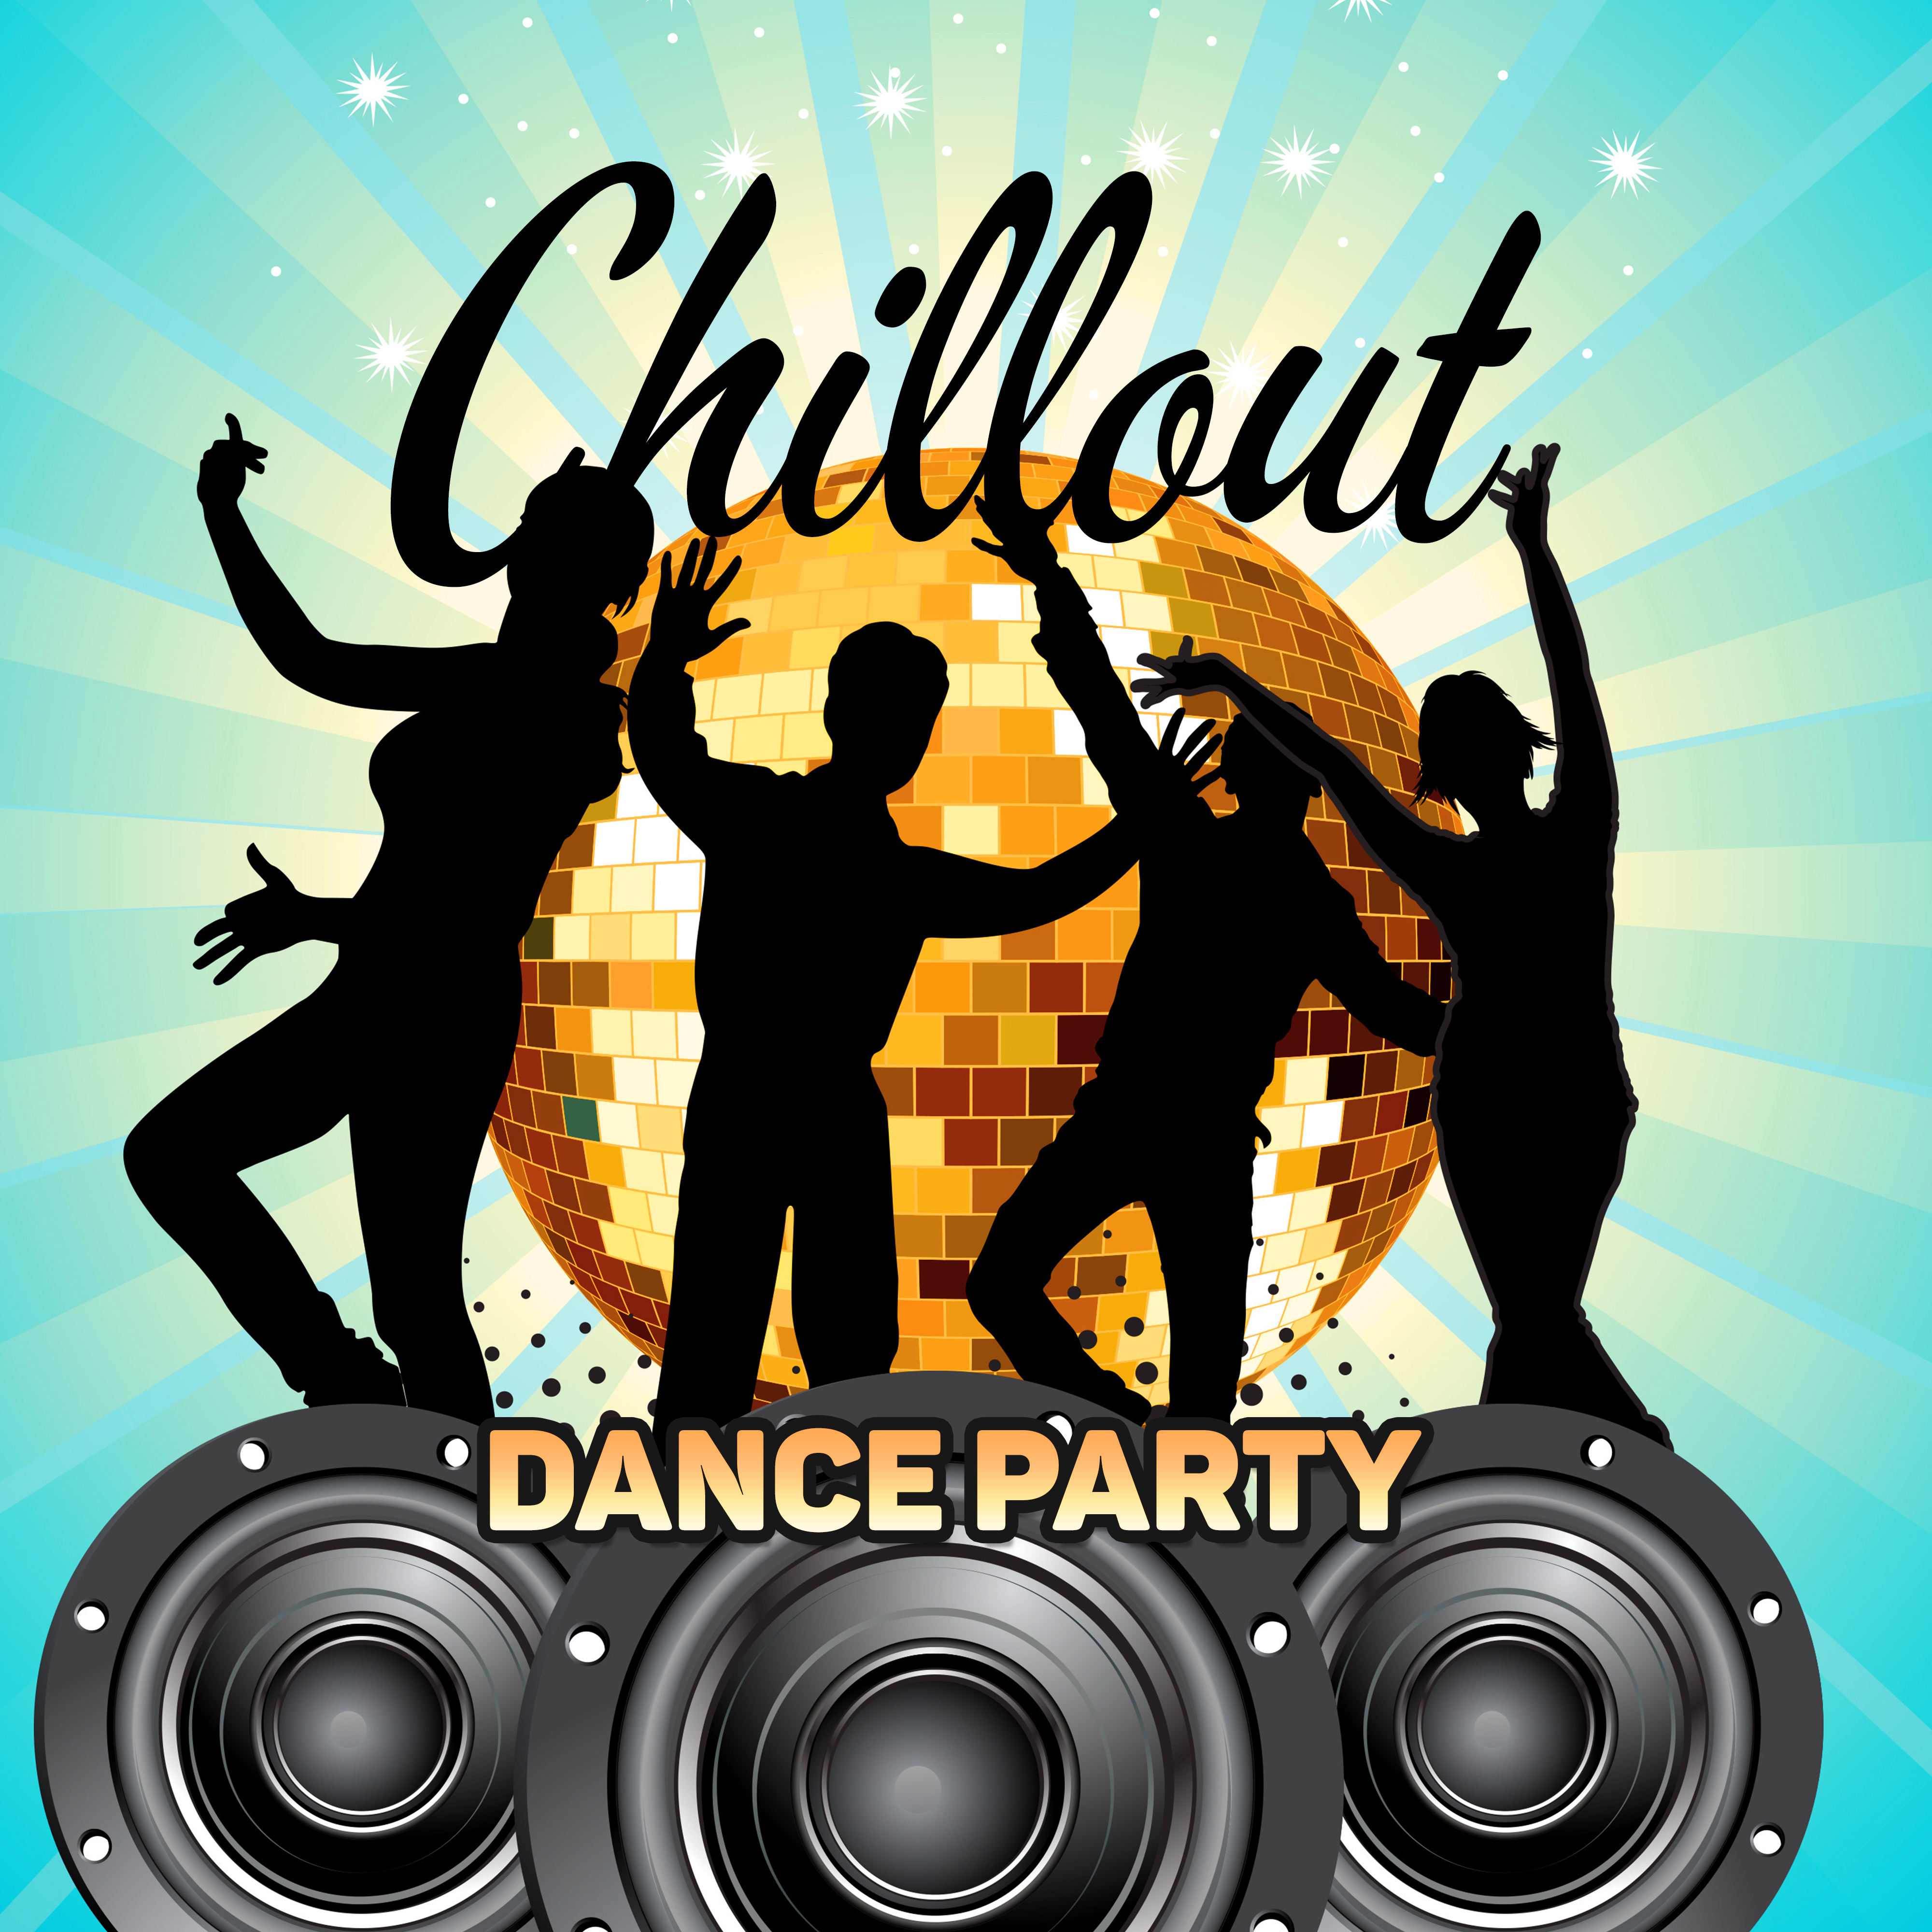 Chillout Dance Party  Electronic Music, Chill Out 2017, Relax, Trance Party, Dancefloor